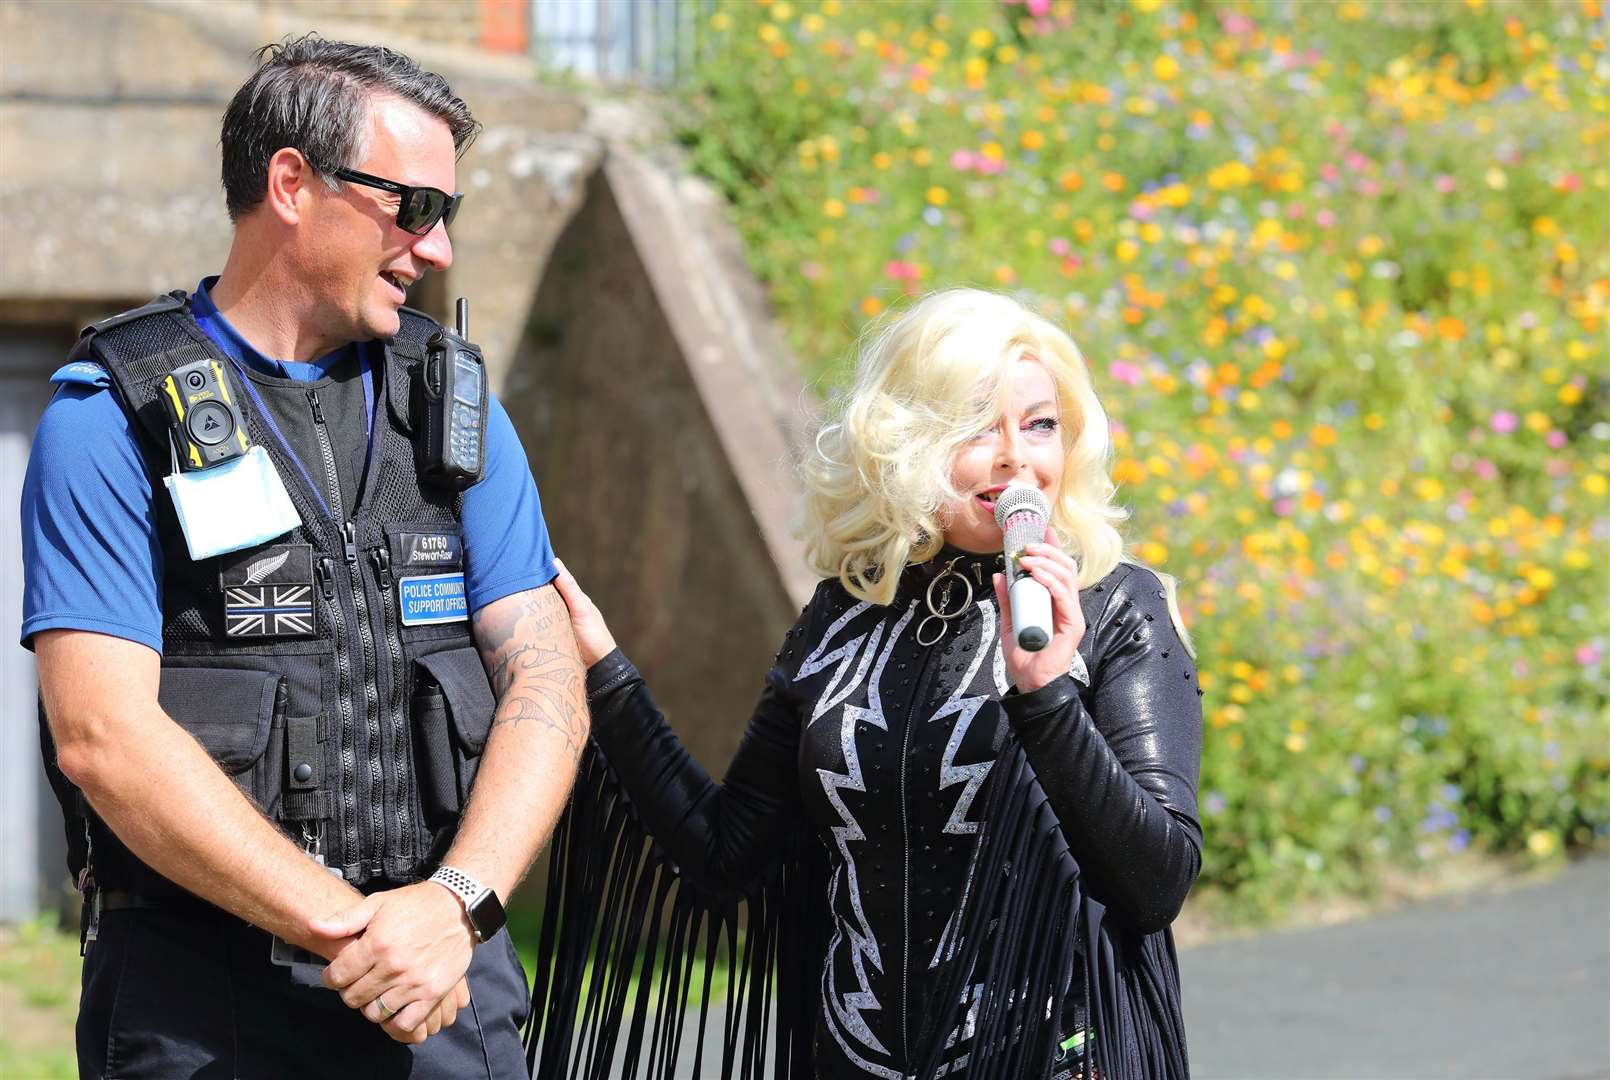 Performer Maybe Gaga and an officer from Kent Police. Photo: Cohesion Plus